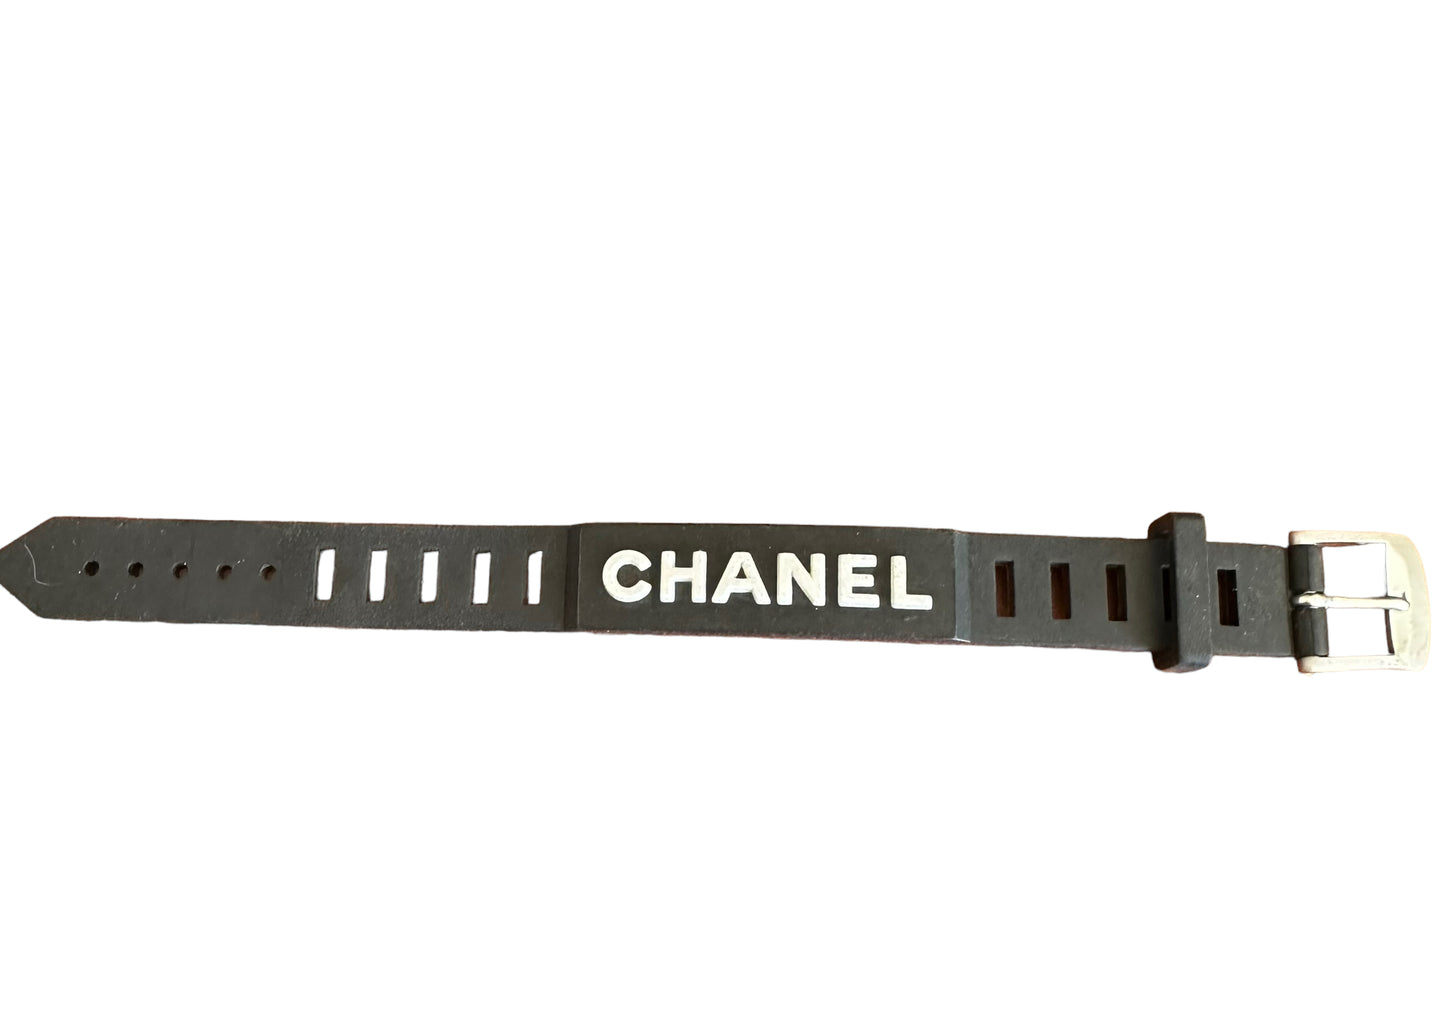 Chanel 1999 watch strap style bracelet black with white